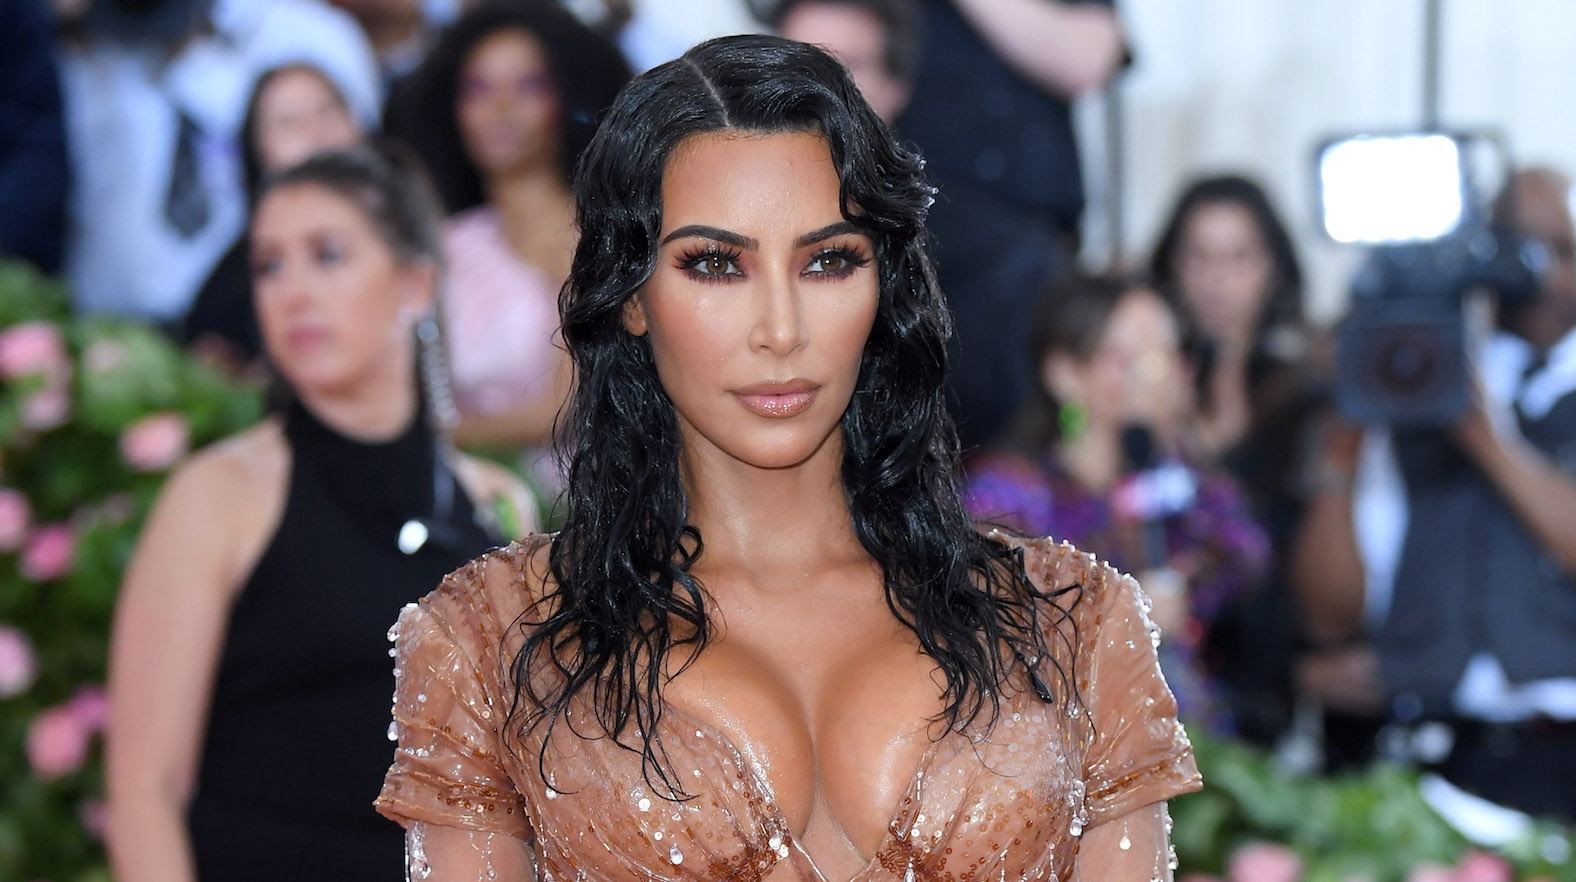 Kim Kardashian body makeup review: Is her KKW Beauty Body Foundation worth  it? - Reviewed